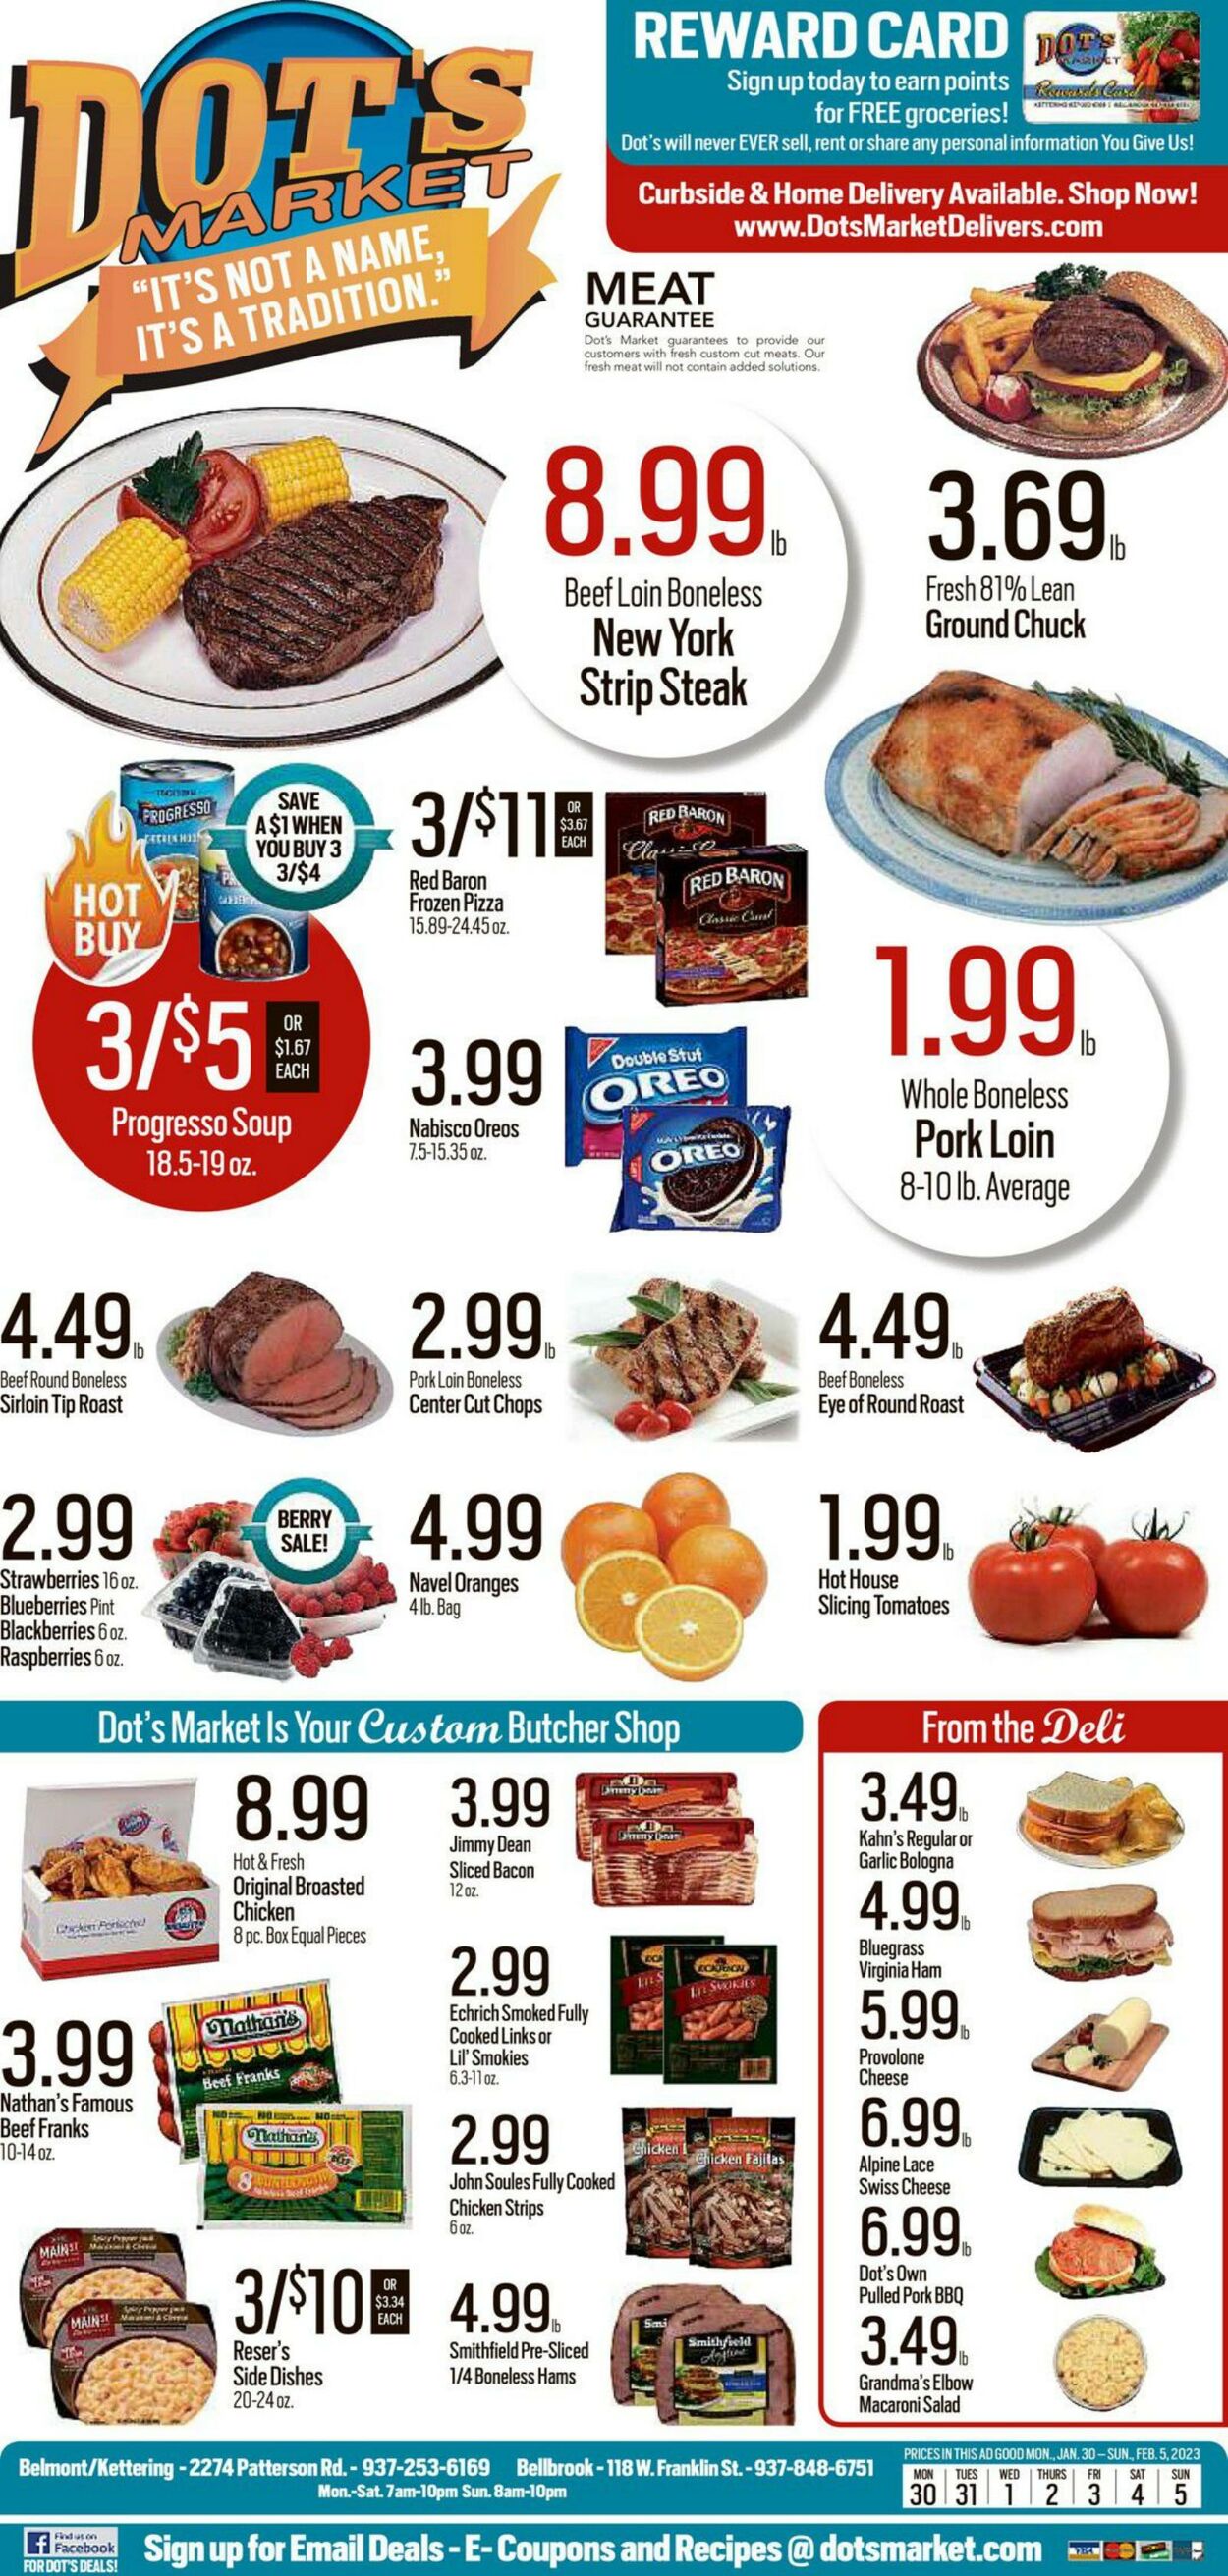 Dot's Market Promotional weekly ads